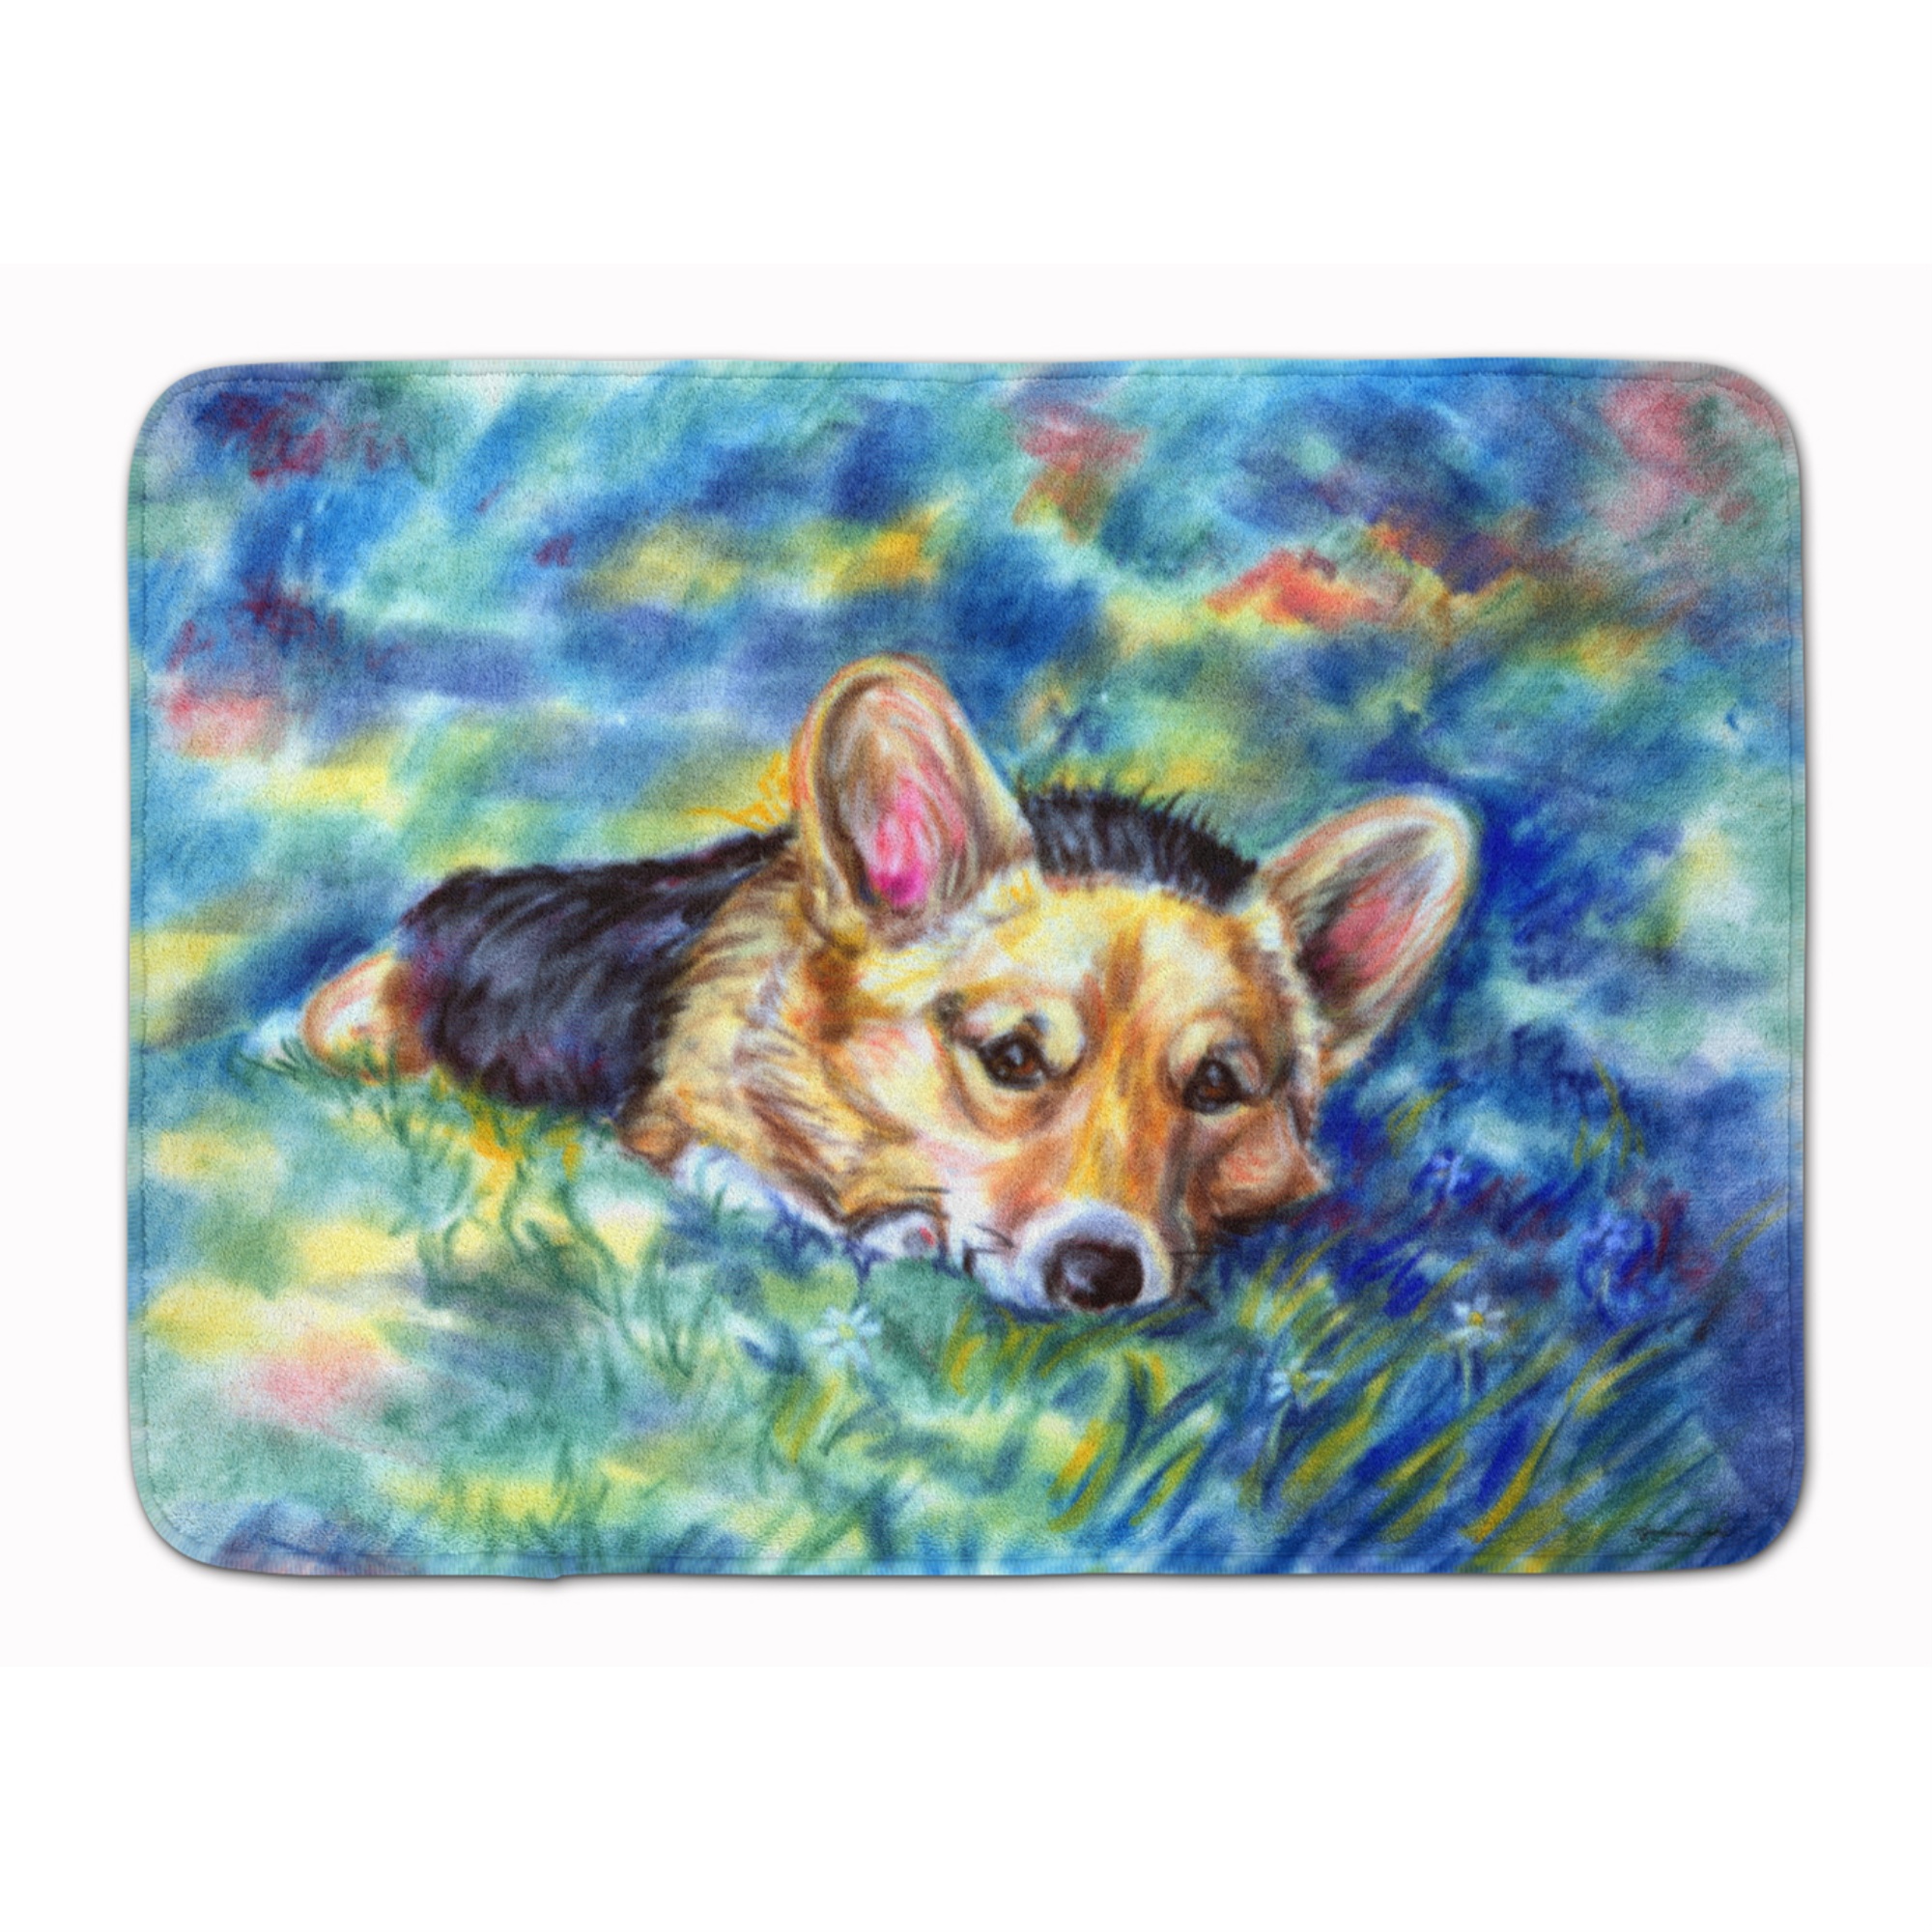 Caroline's Treasures "Caroline's Treasures Corgi Tuckered Out Floor Mat, 19"" x 27"", Multicolor"